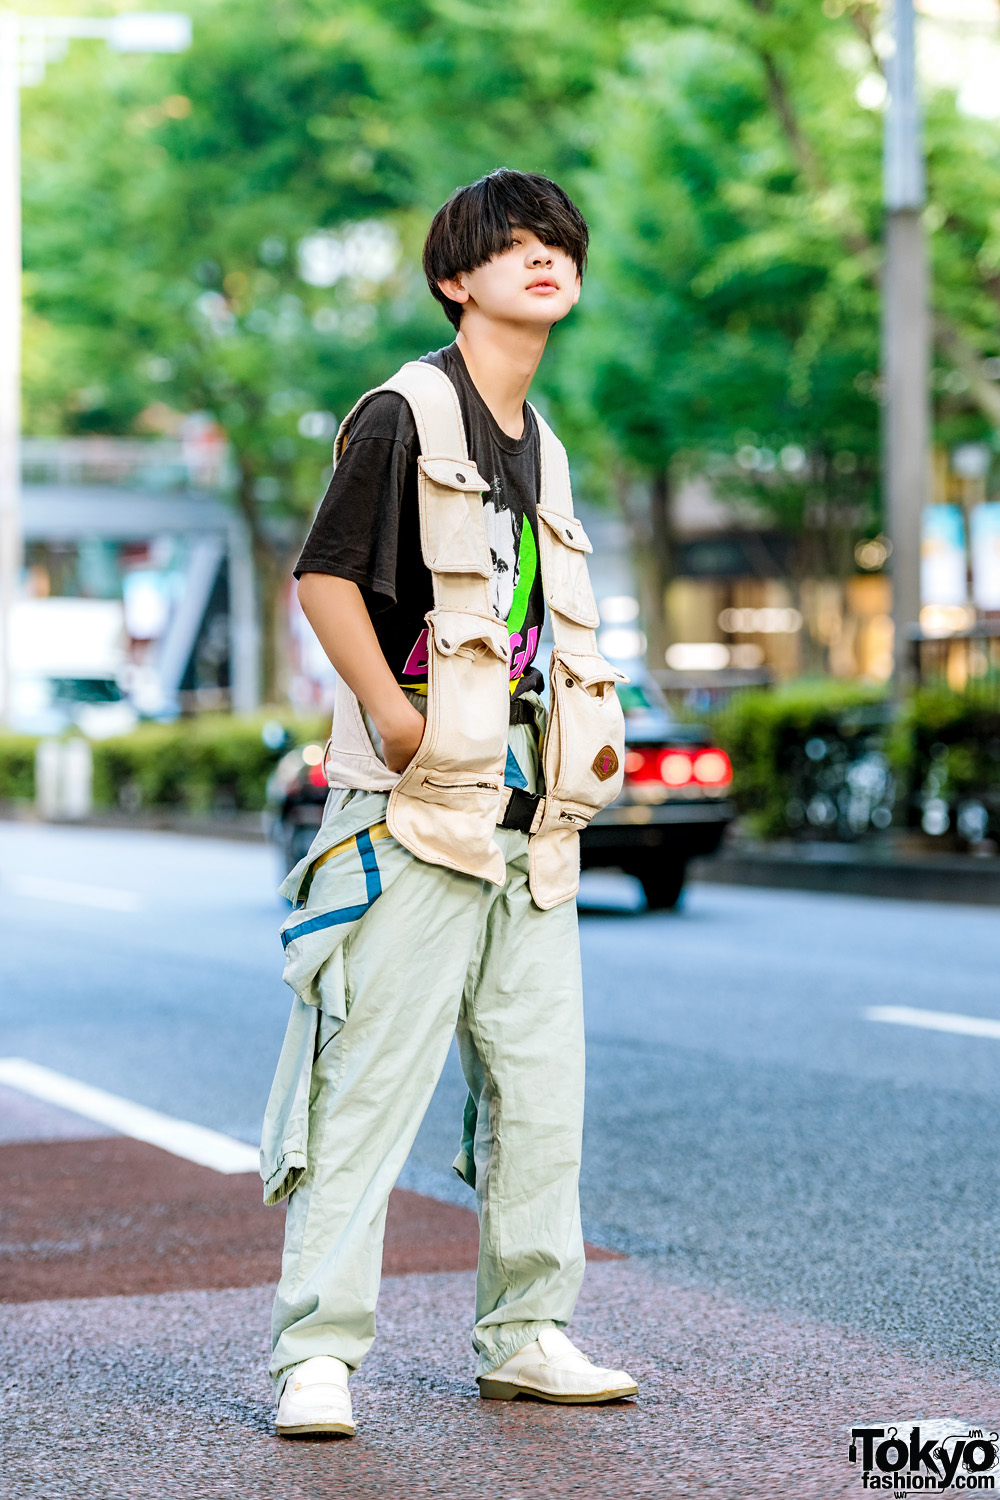 Sporty Street Style in Harajuku w/ Adidas Jacket & Track Pants, Big Bang Theory T-Shirt, Revo Jeans Multiple Pocket Vest & Penny Loafers